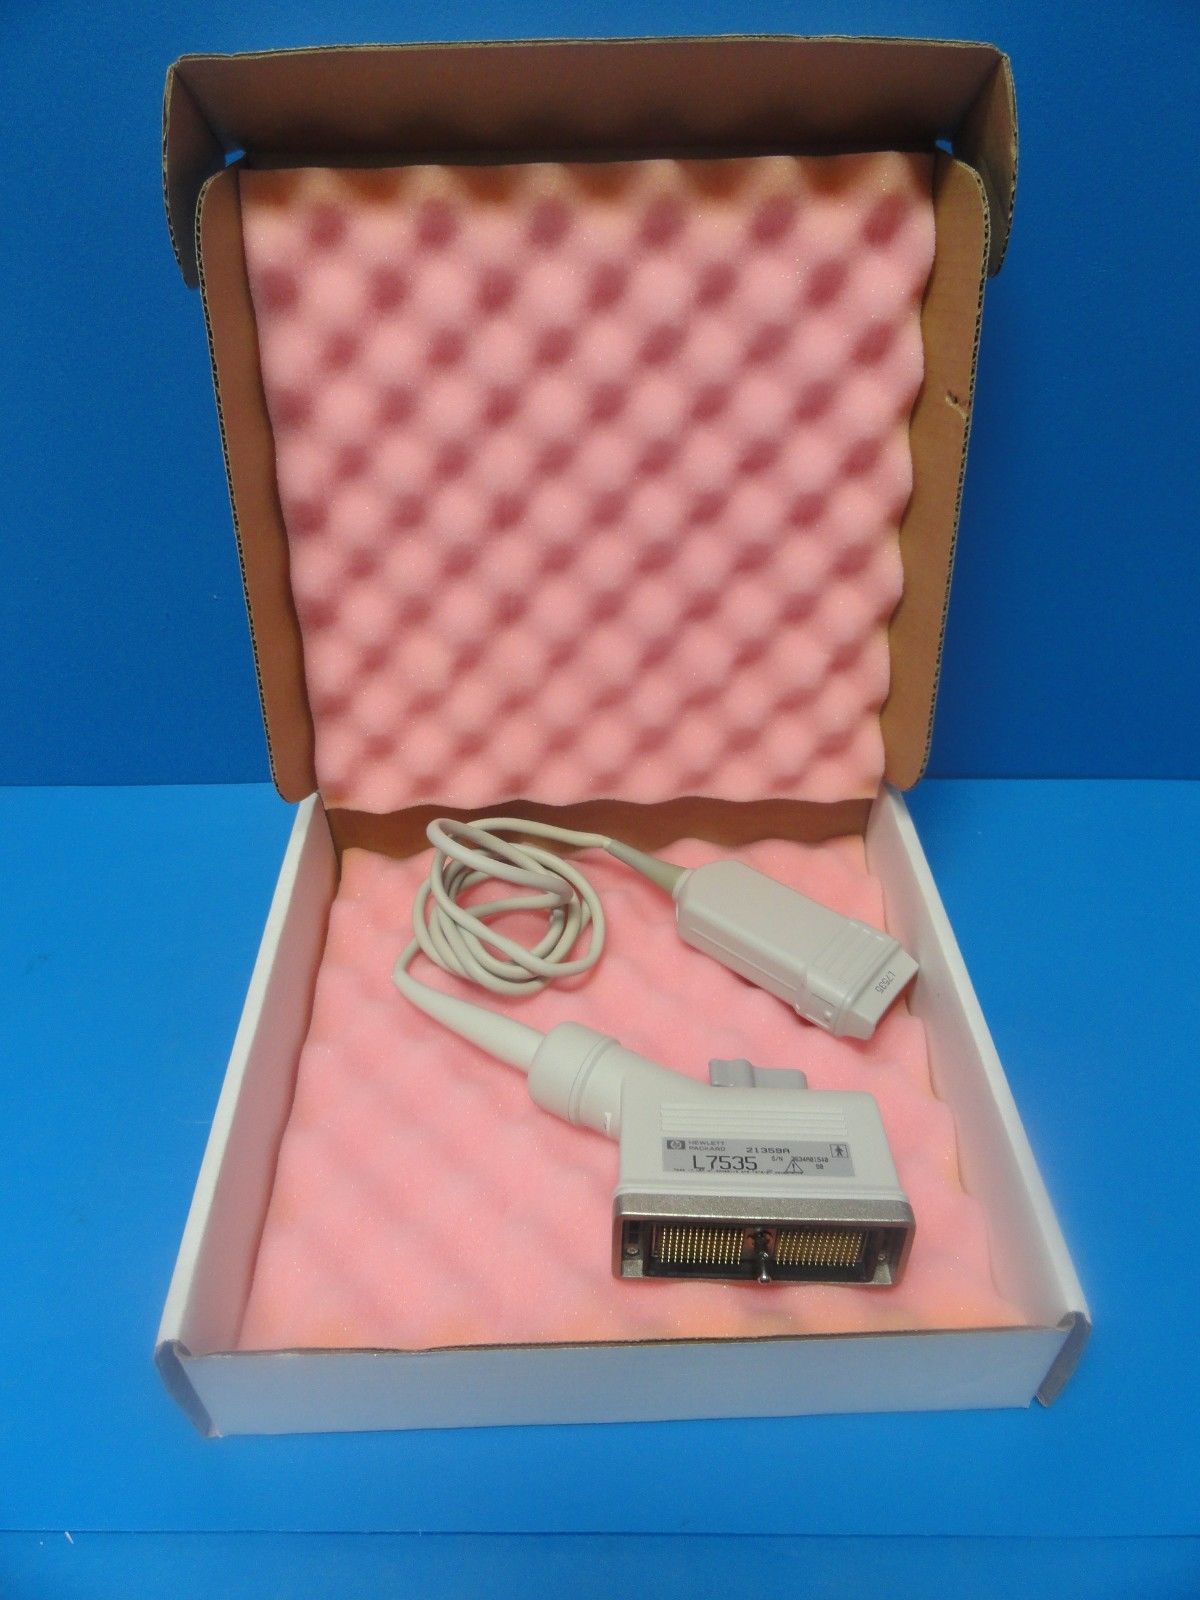 a box with a probe inside